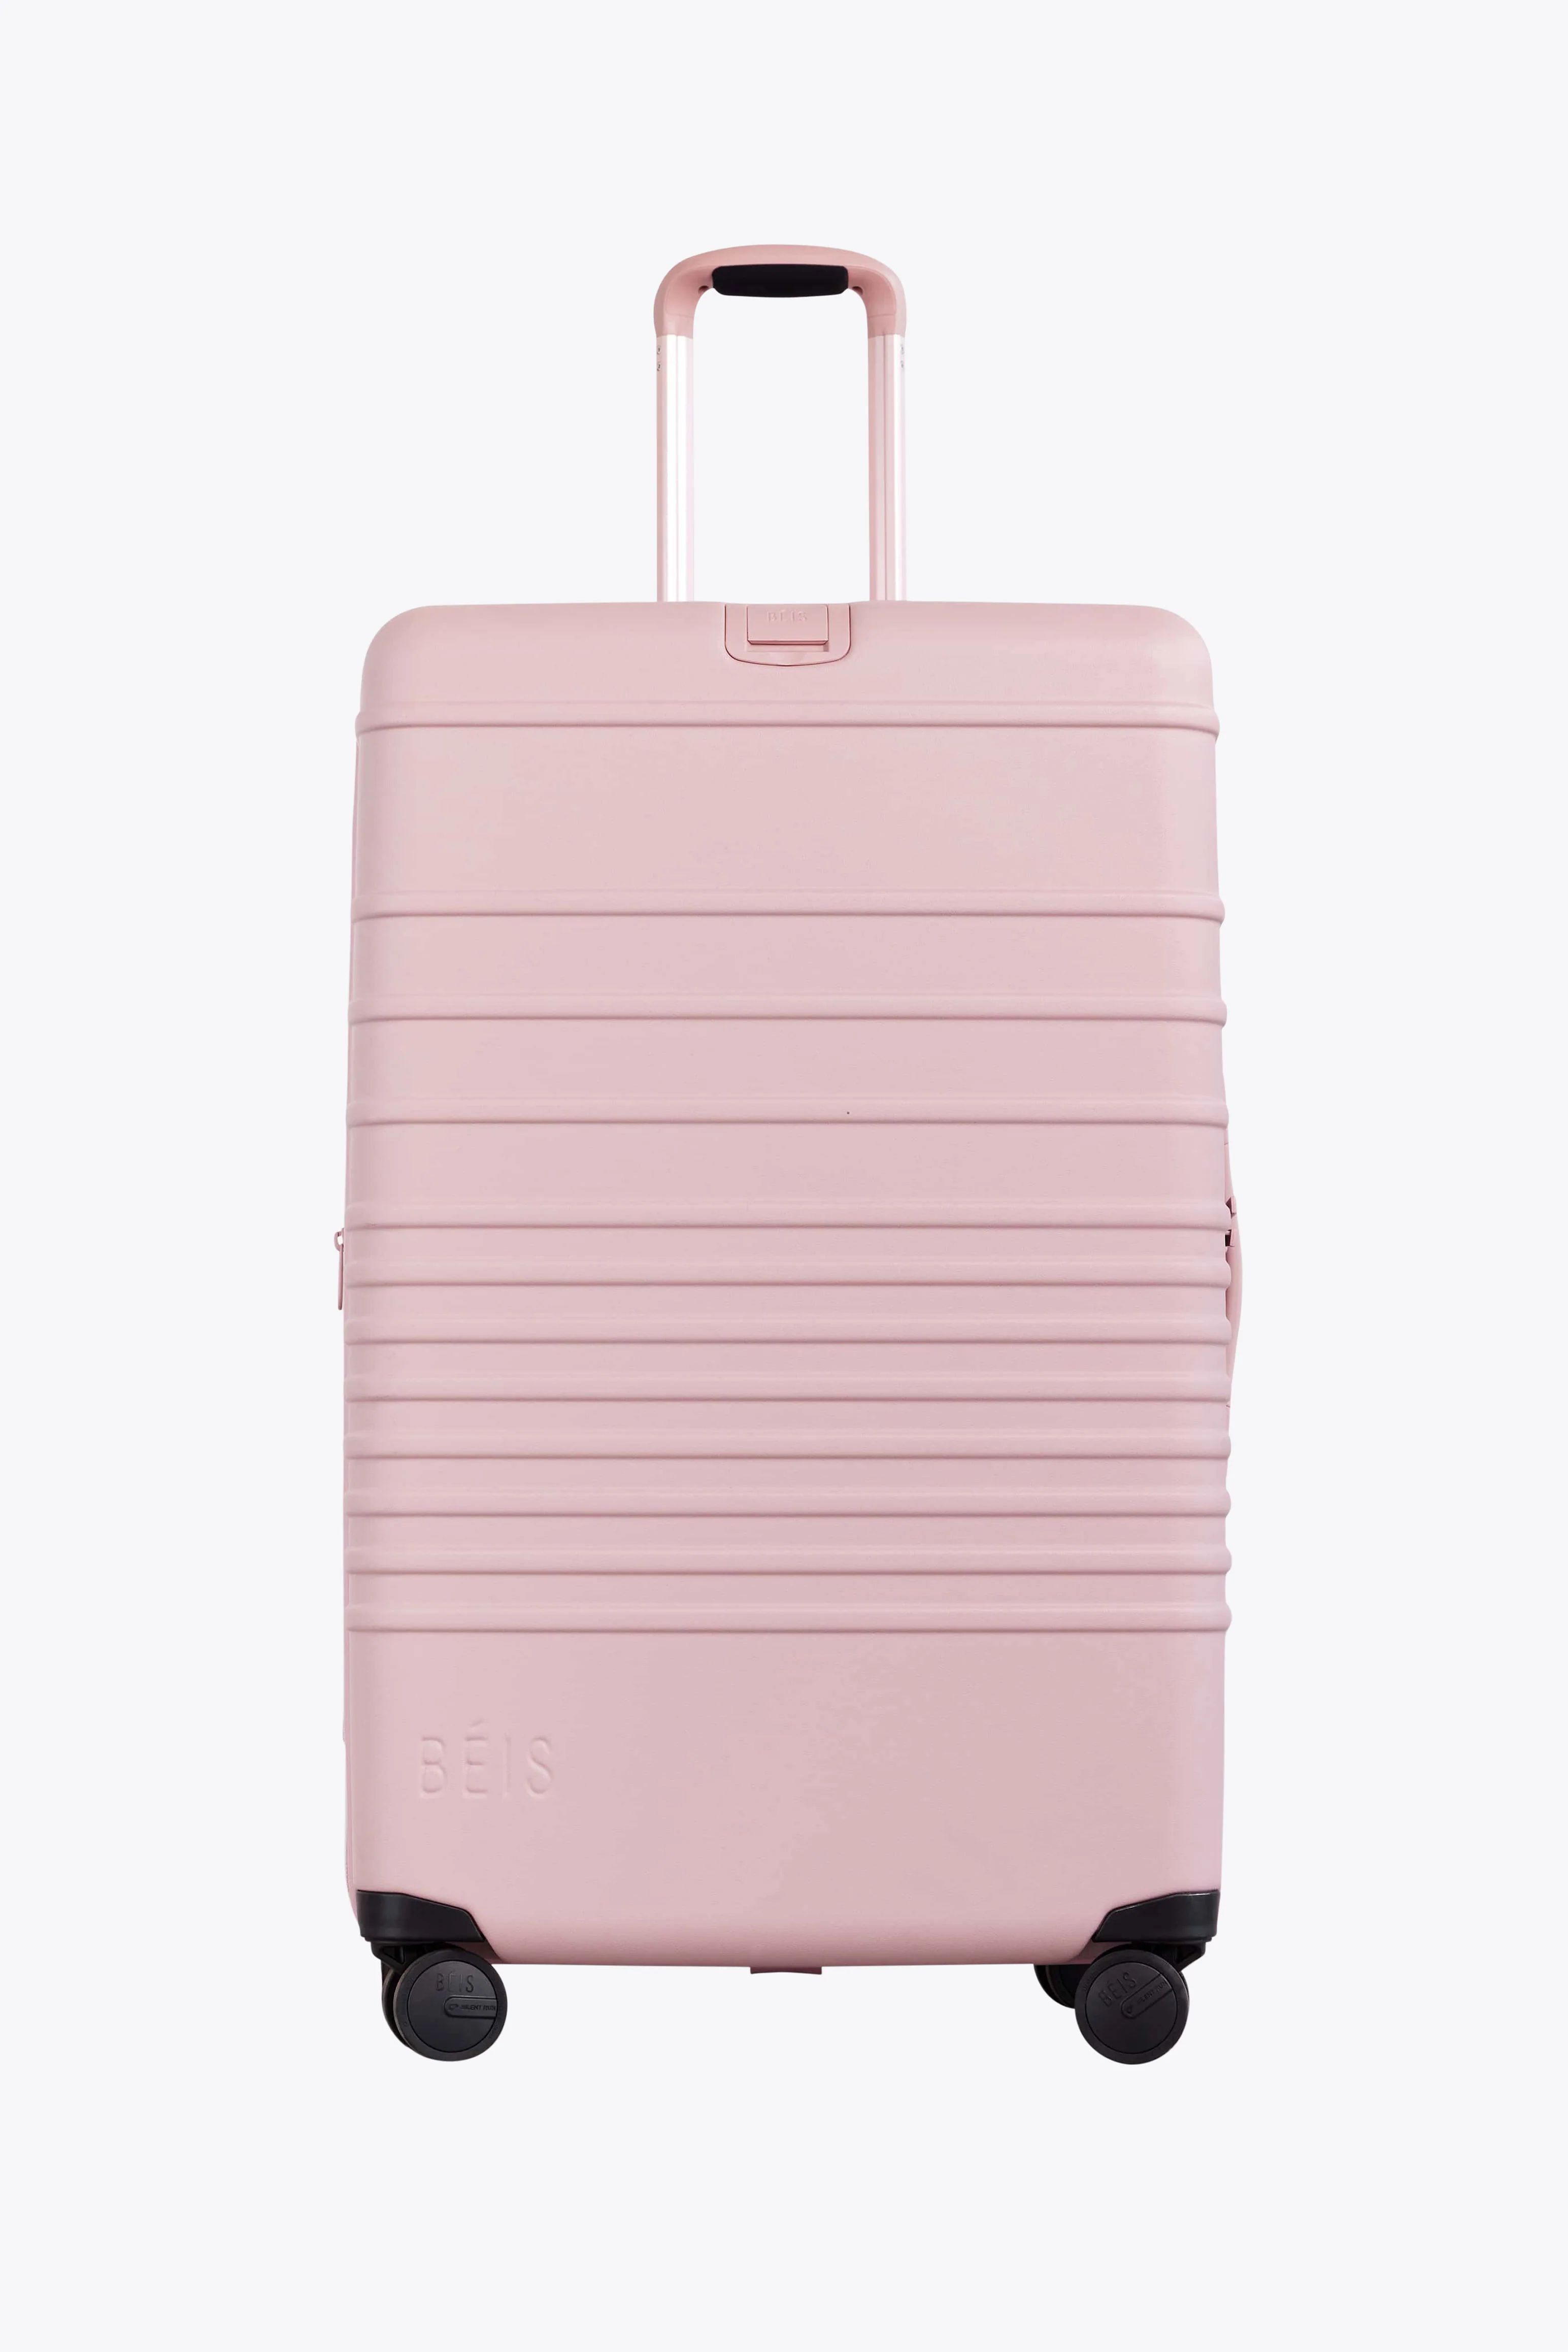 The Large Check-In Roller in Atlas Pink | BÉIS Travel